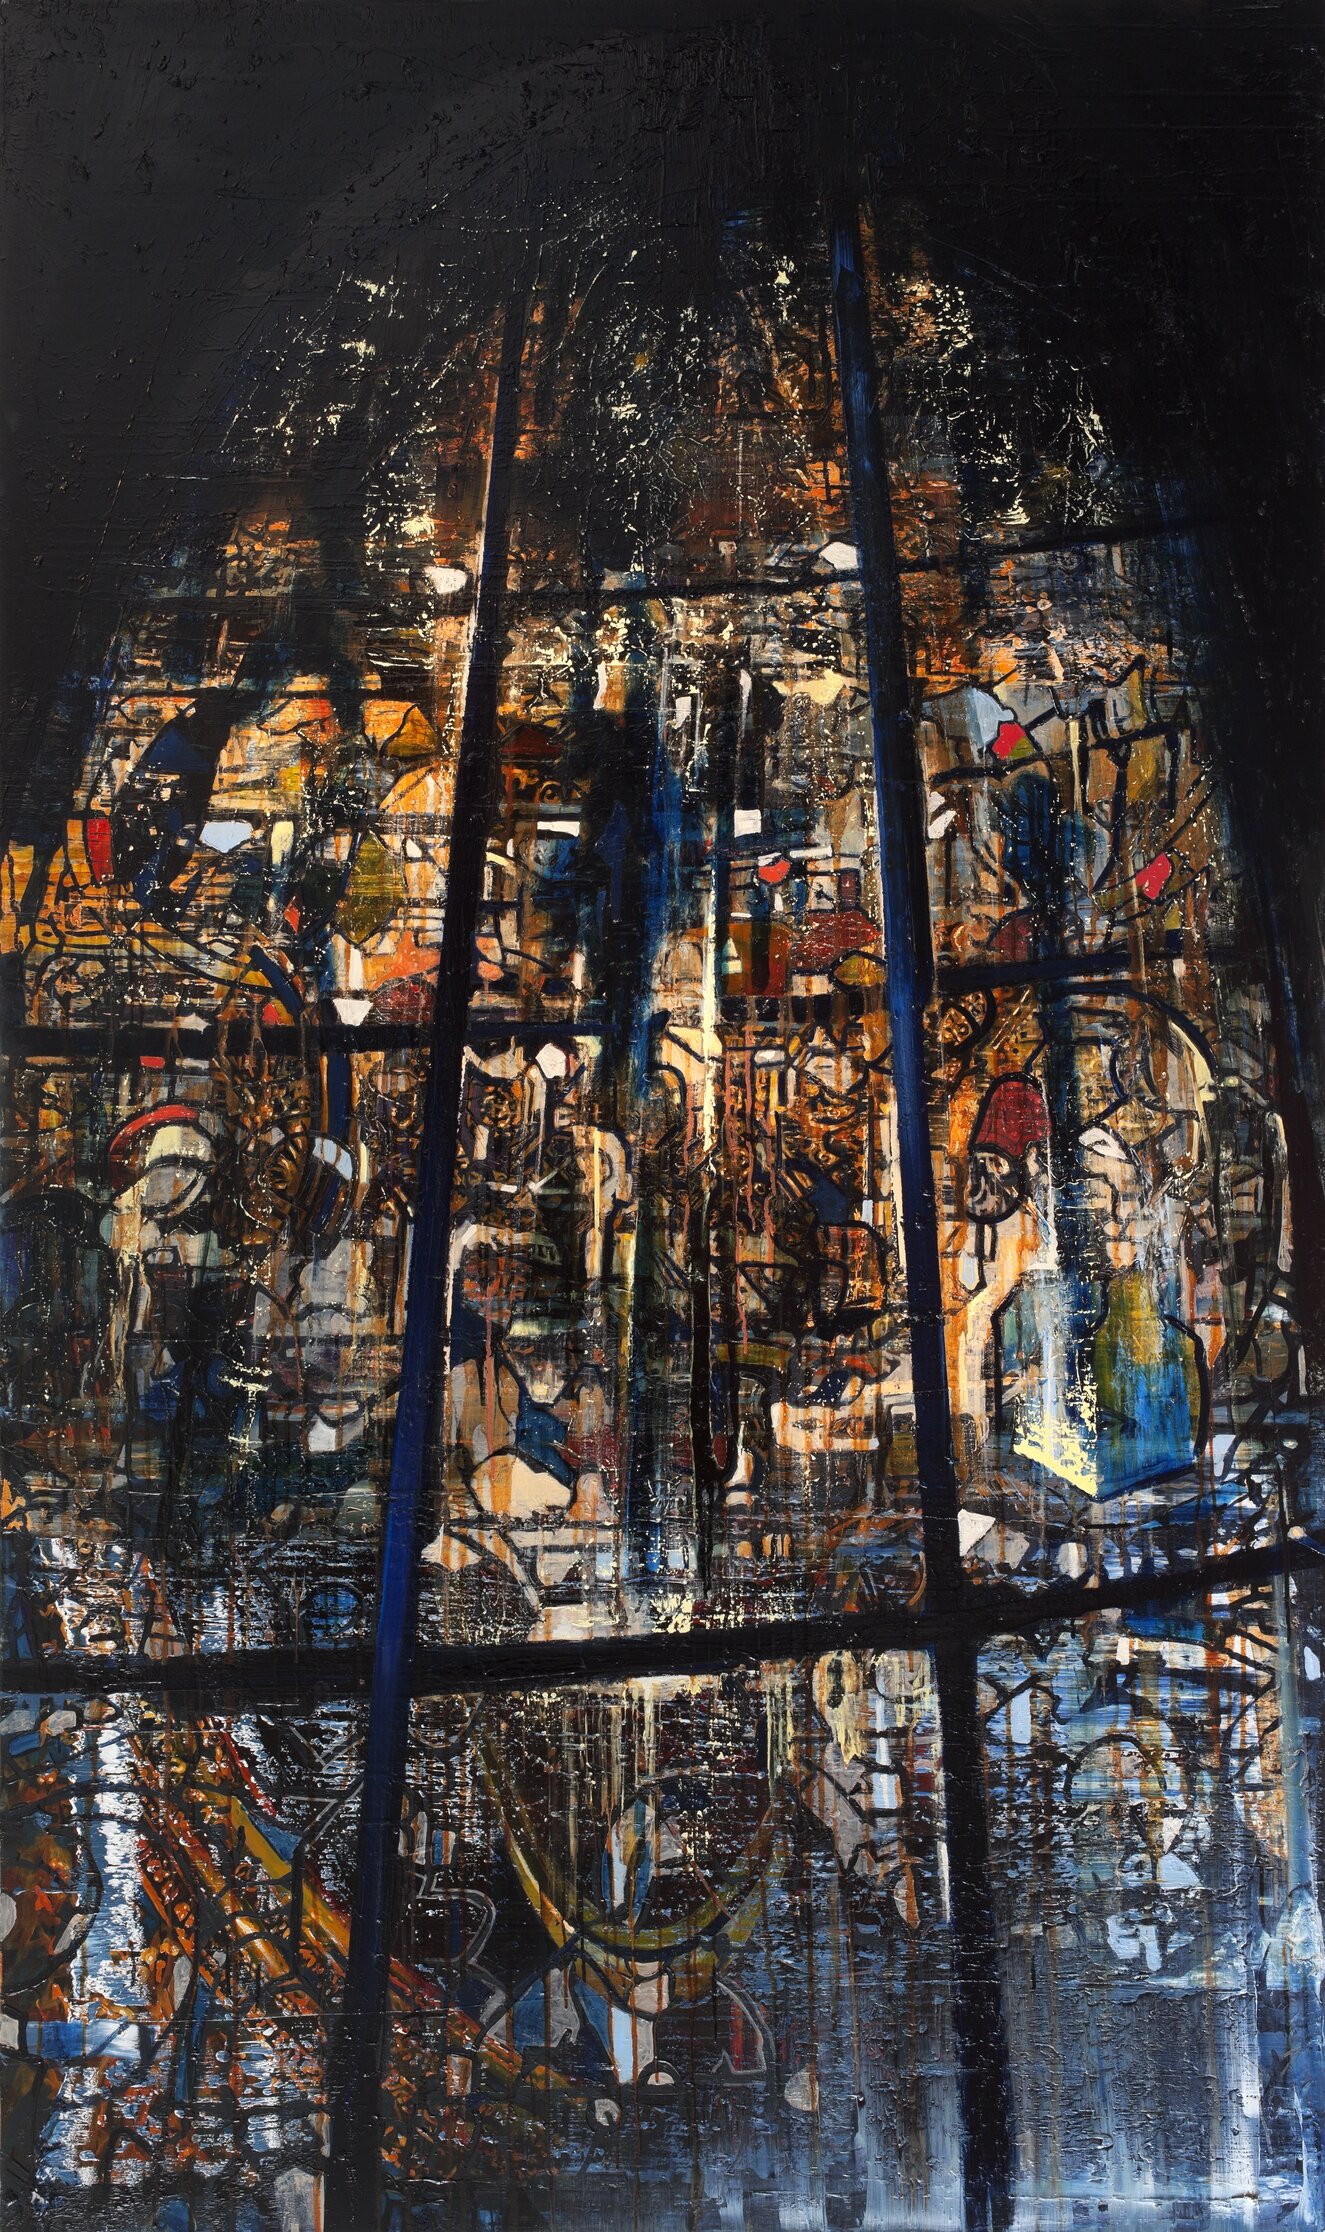 Stained Glass (2011), oil on canvas, 240 x 150 cm